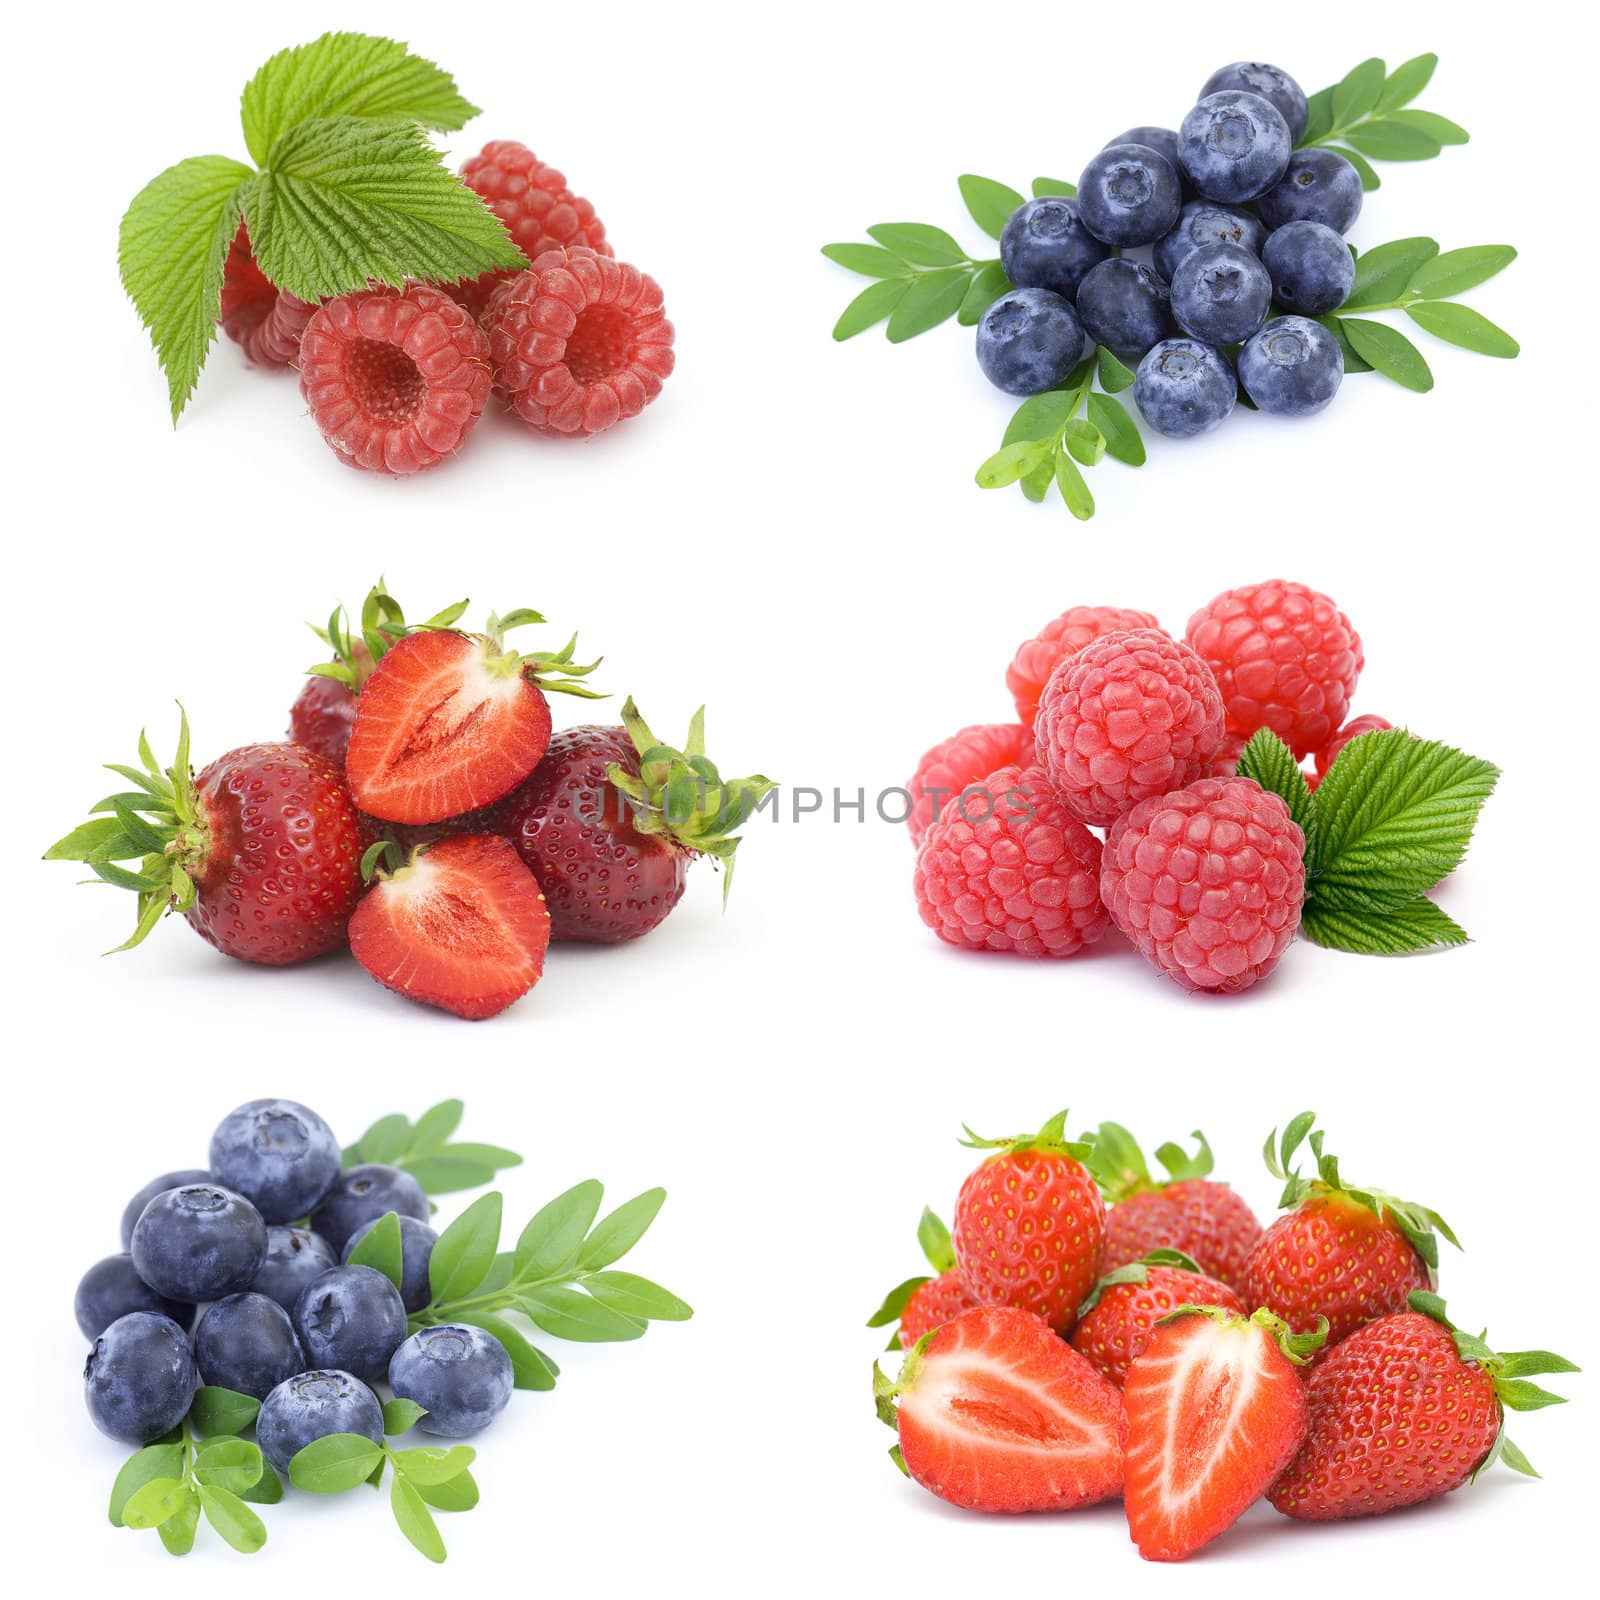 collection of fresh fruits by miradrozdowski